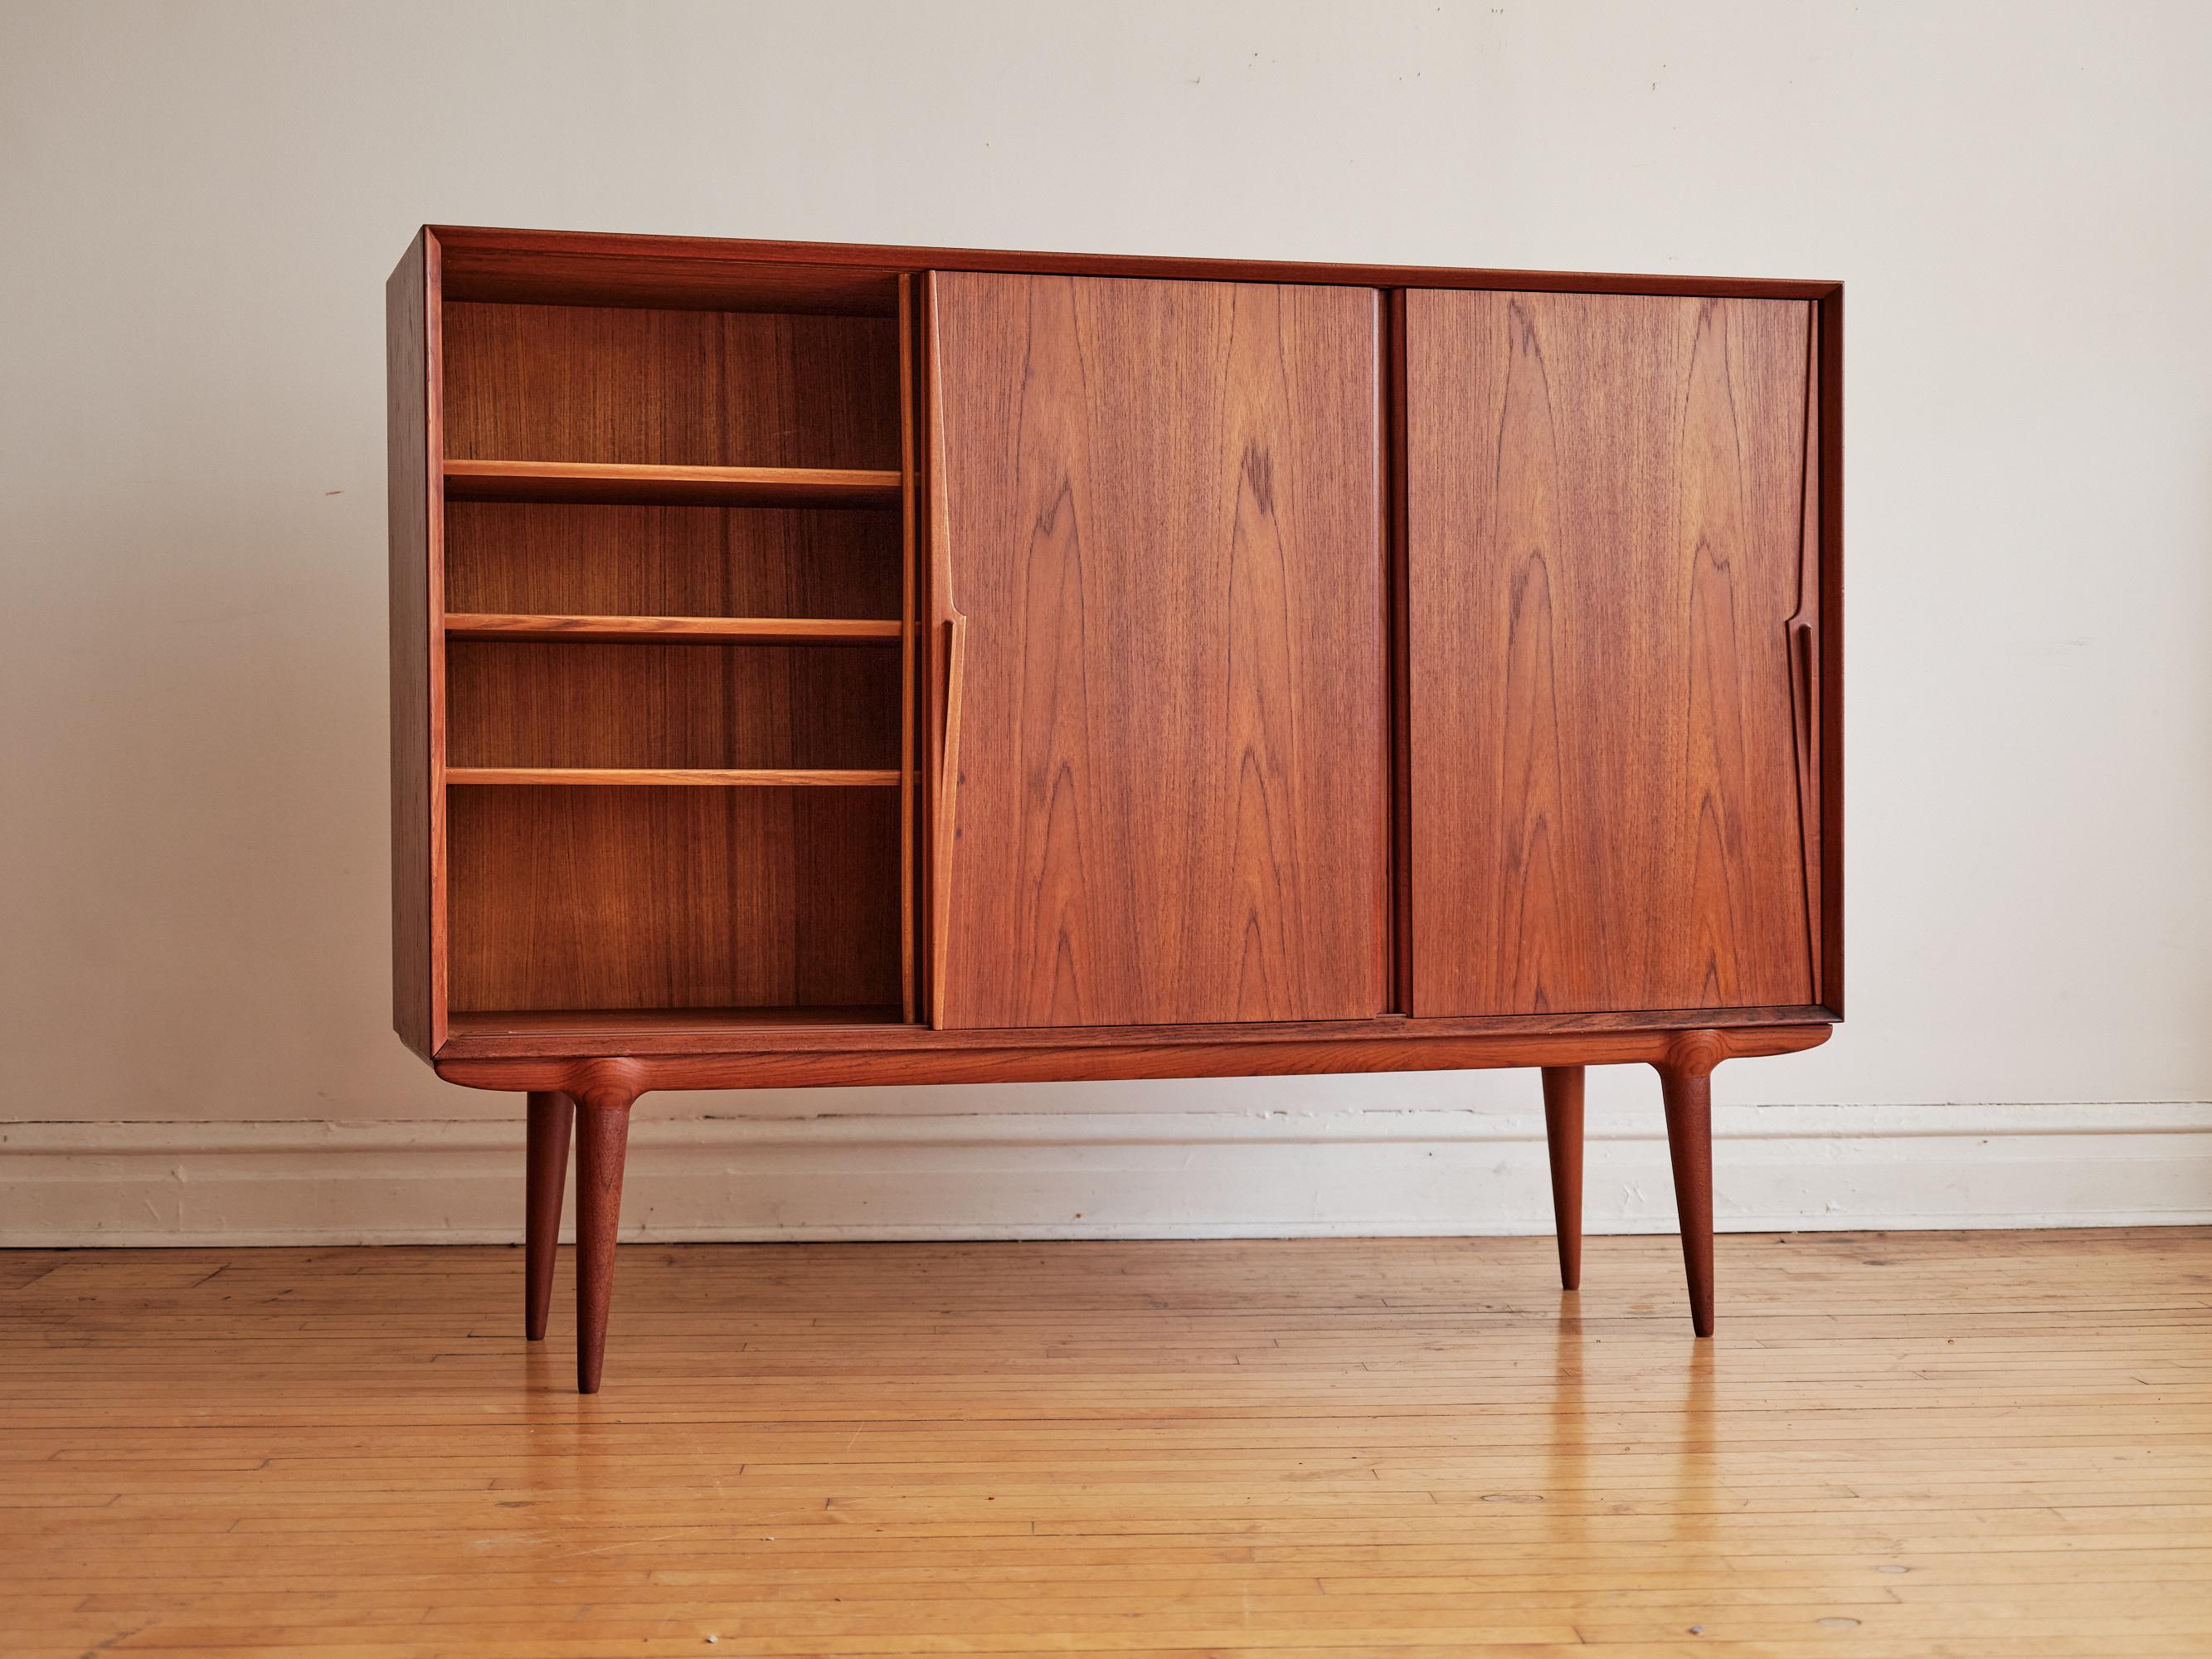 Danish Mid-Century Modern tall teak credenza.
Just imported from Copenhagen.
Model No 15 designed by Gunni Omann for Omann Jun.
Six slide-out dovetailed drawers which double as trays.
Three adjustable shelves.
Finished backside.
Super sleek